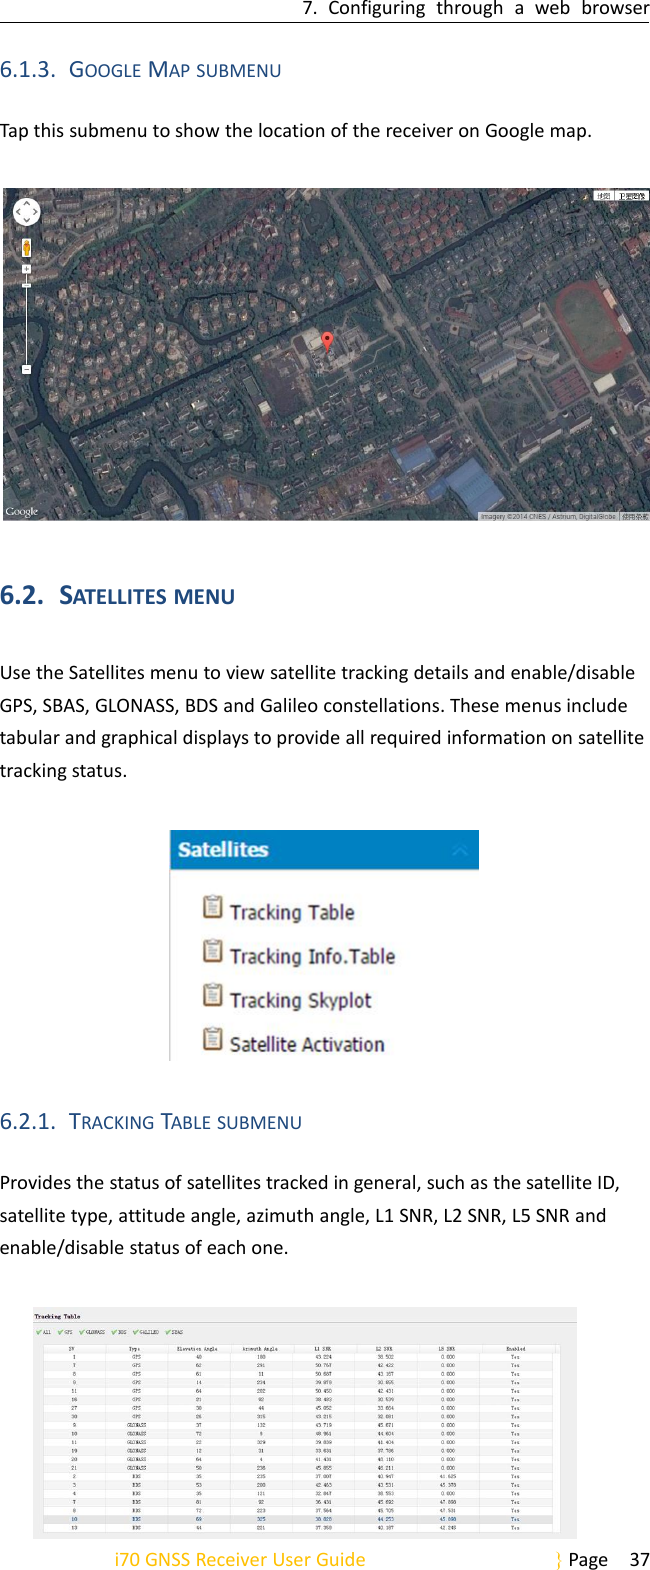 7. Configuring through a web browseri70 GNSS Receiver User Guide Page 376.1.3. GOOGLE MAP SUBMENUTap this submenu to show the location of the receiver on Google map.6.2. SATELLITES MENUUse the Satellites menu to view satellite tracking details and enable/disableGPS, SBAS, GLONASS, BDS and Galileo constellations. These menus includetabular and graphical displays to provide all required information on satellitetracking status.6.2.1. TRACKING TABLE SUBMENUProvides the status of satellites tracked in general, such as the satellite ID,satellite type, attitude angle, azimuth angle, L1 SNR, L2 SNR, L5 SNR andenable/disable status of each one.